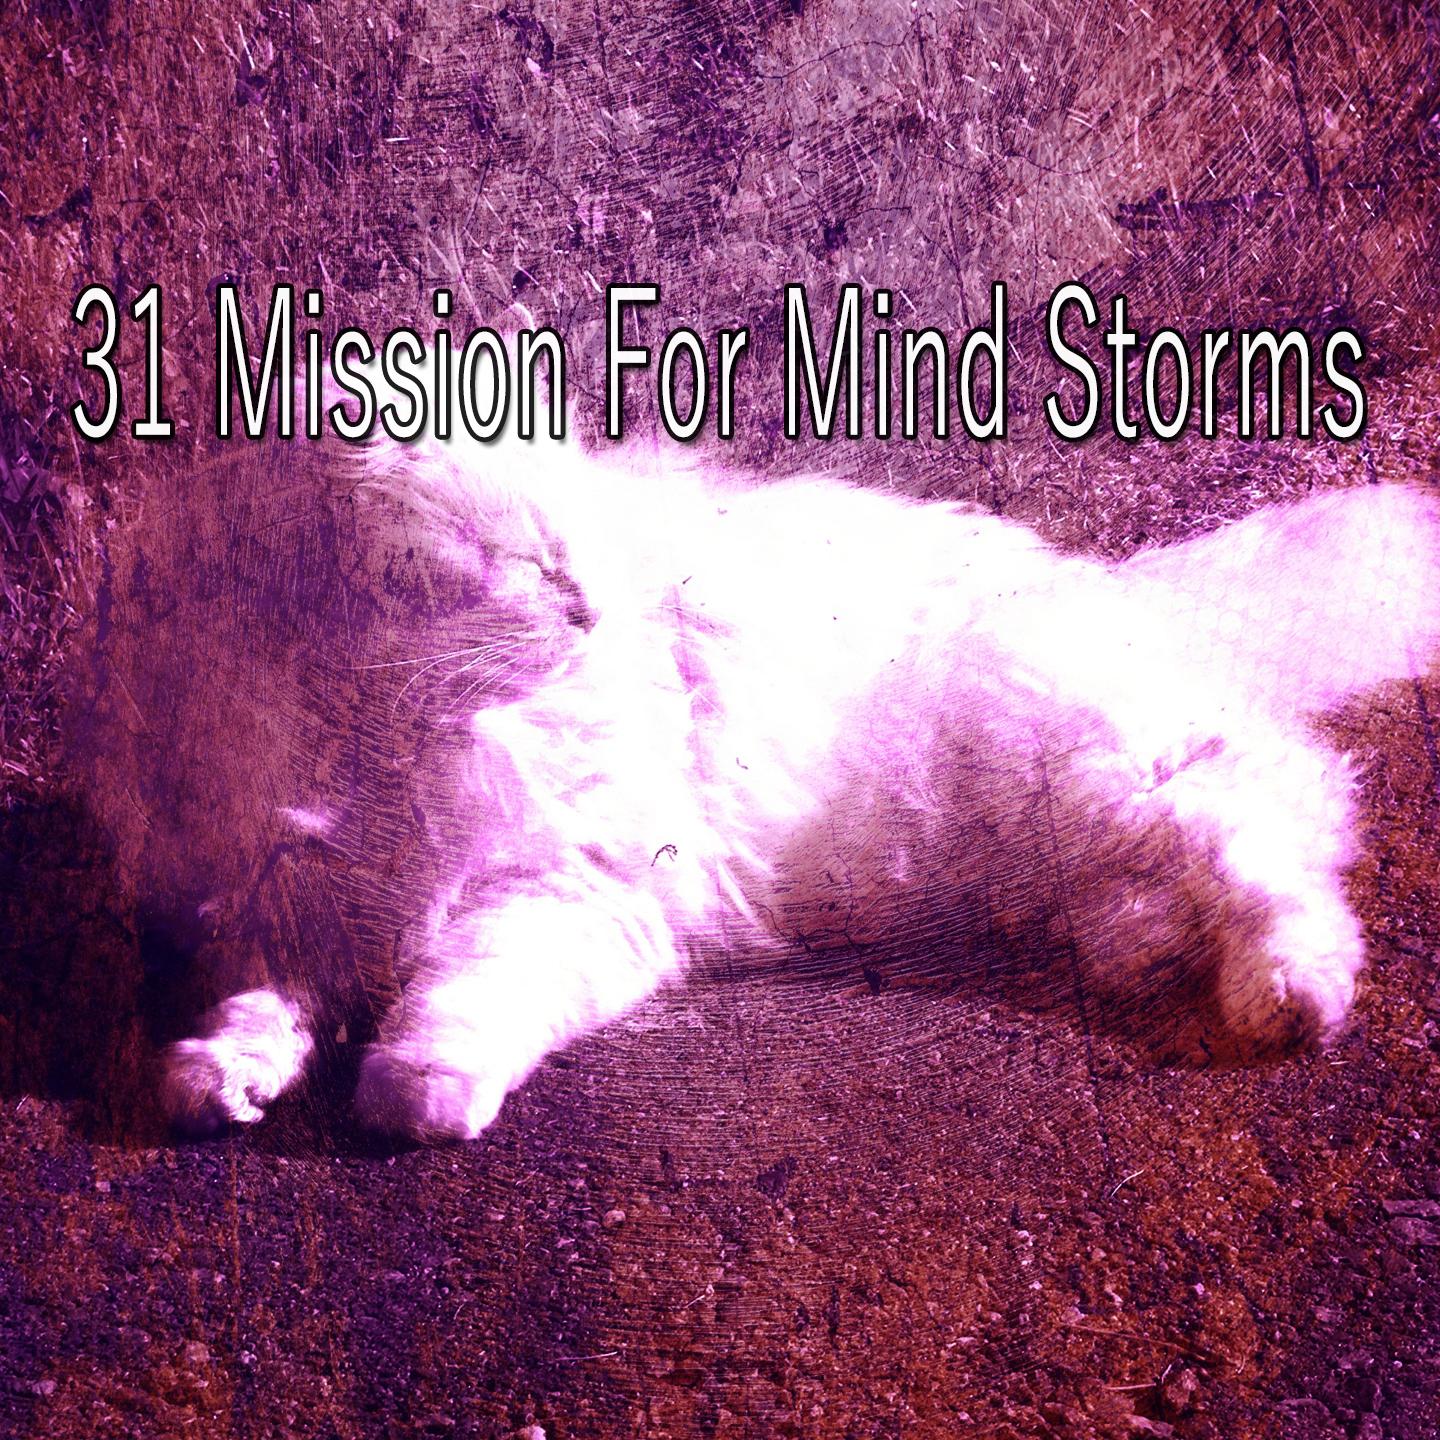 31 Mission for Mind Storms